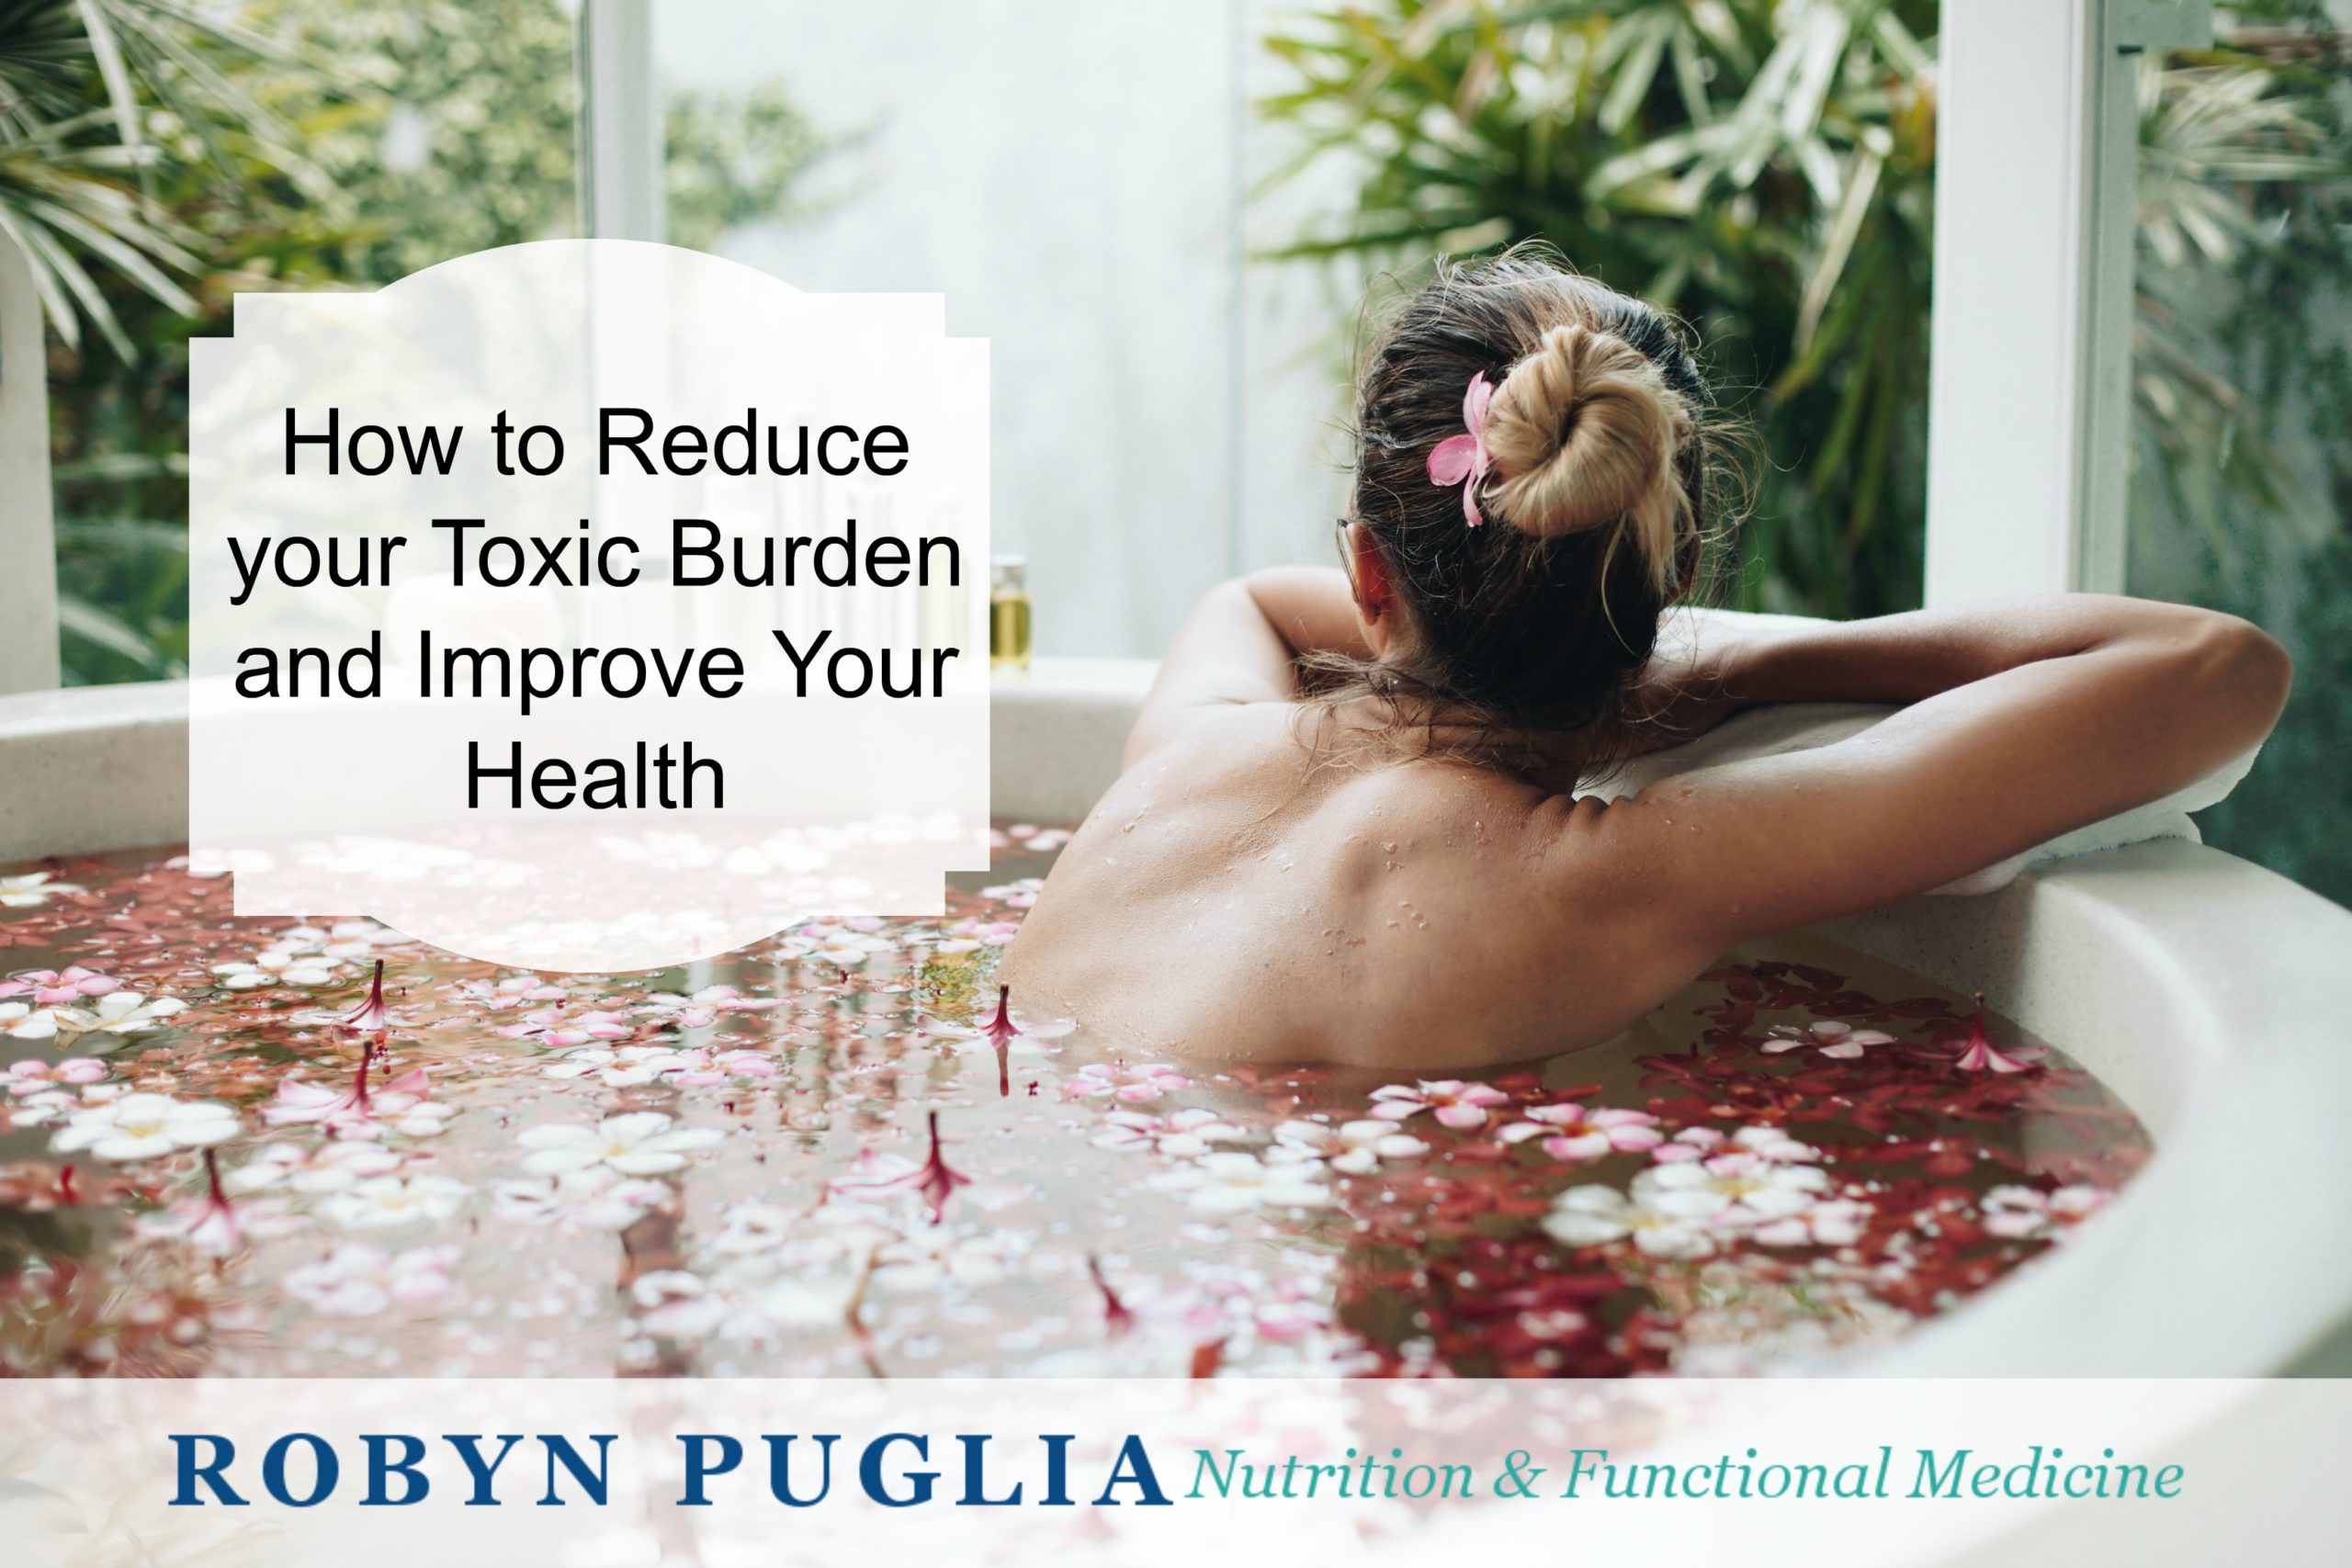 Your Toxic Burden: How to Reduce It and Improve Your Health